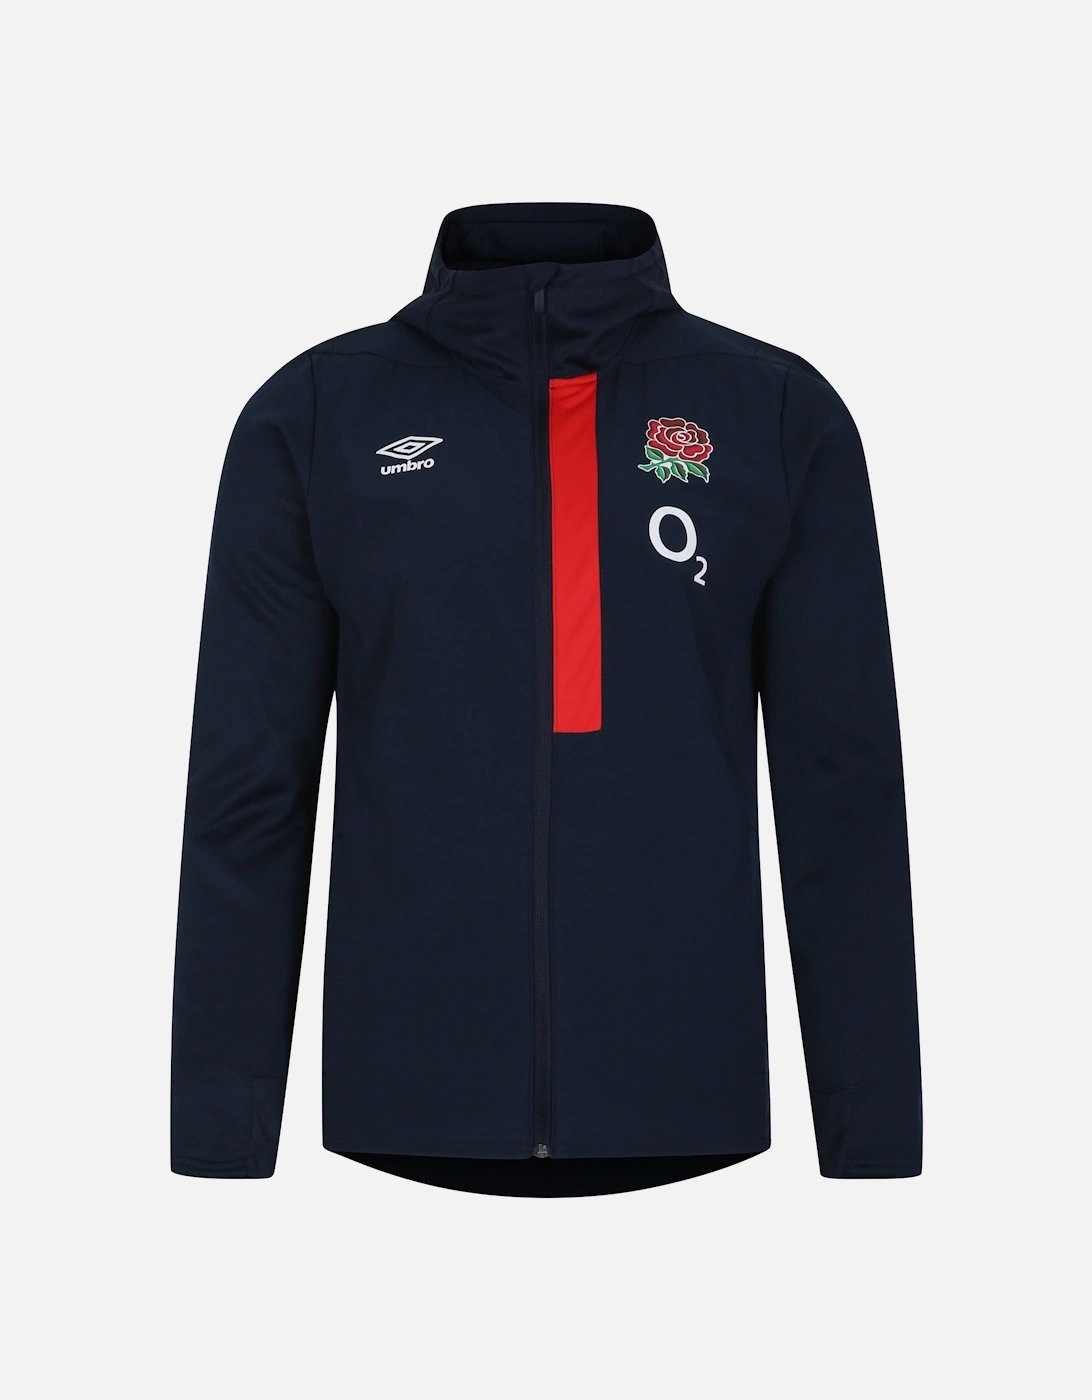 Mens 23/24 England Rugby Hooded Jacket, 6 of 5